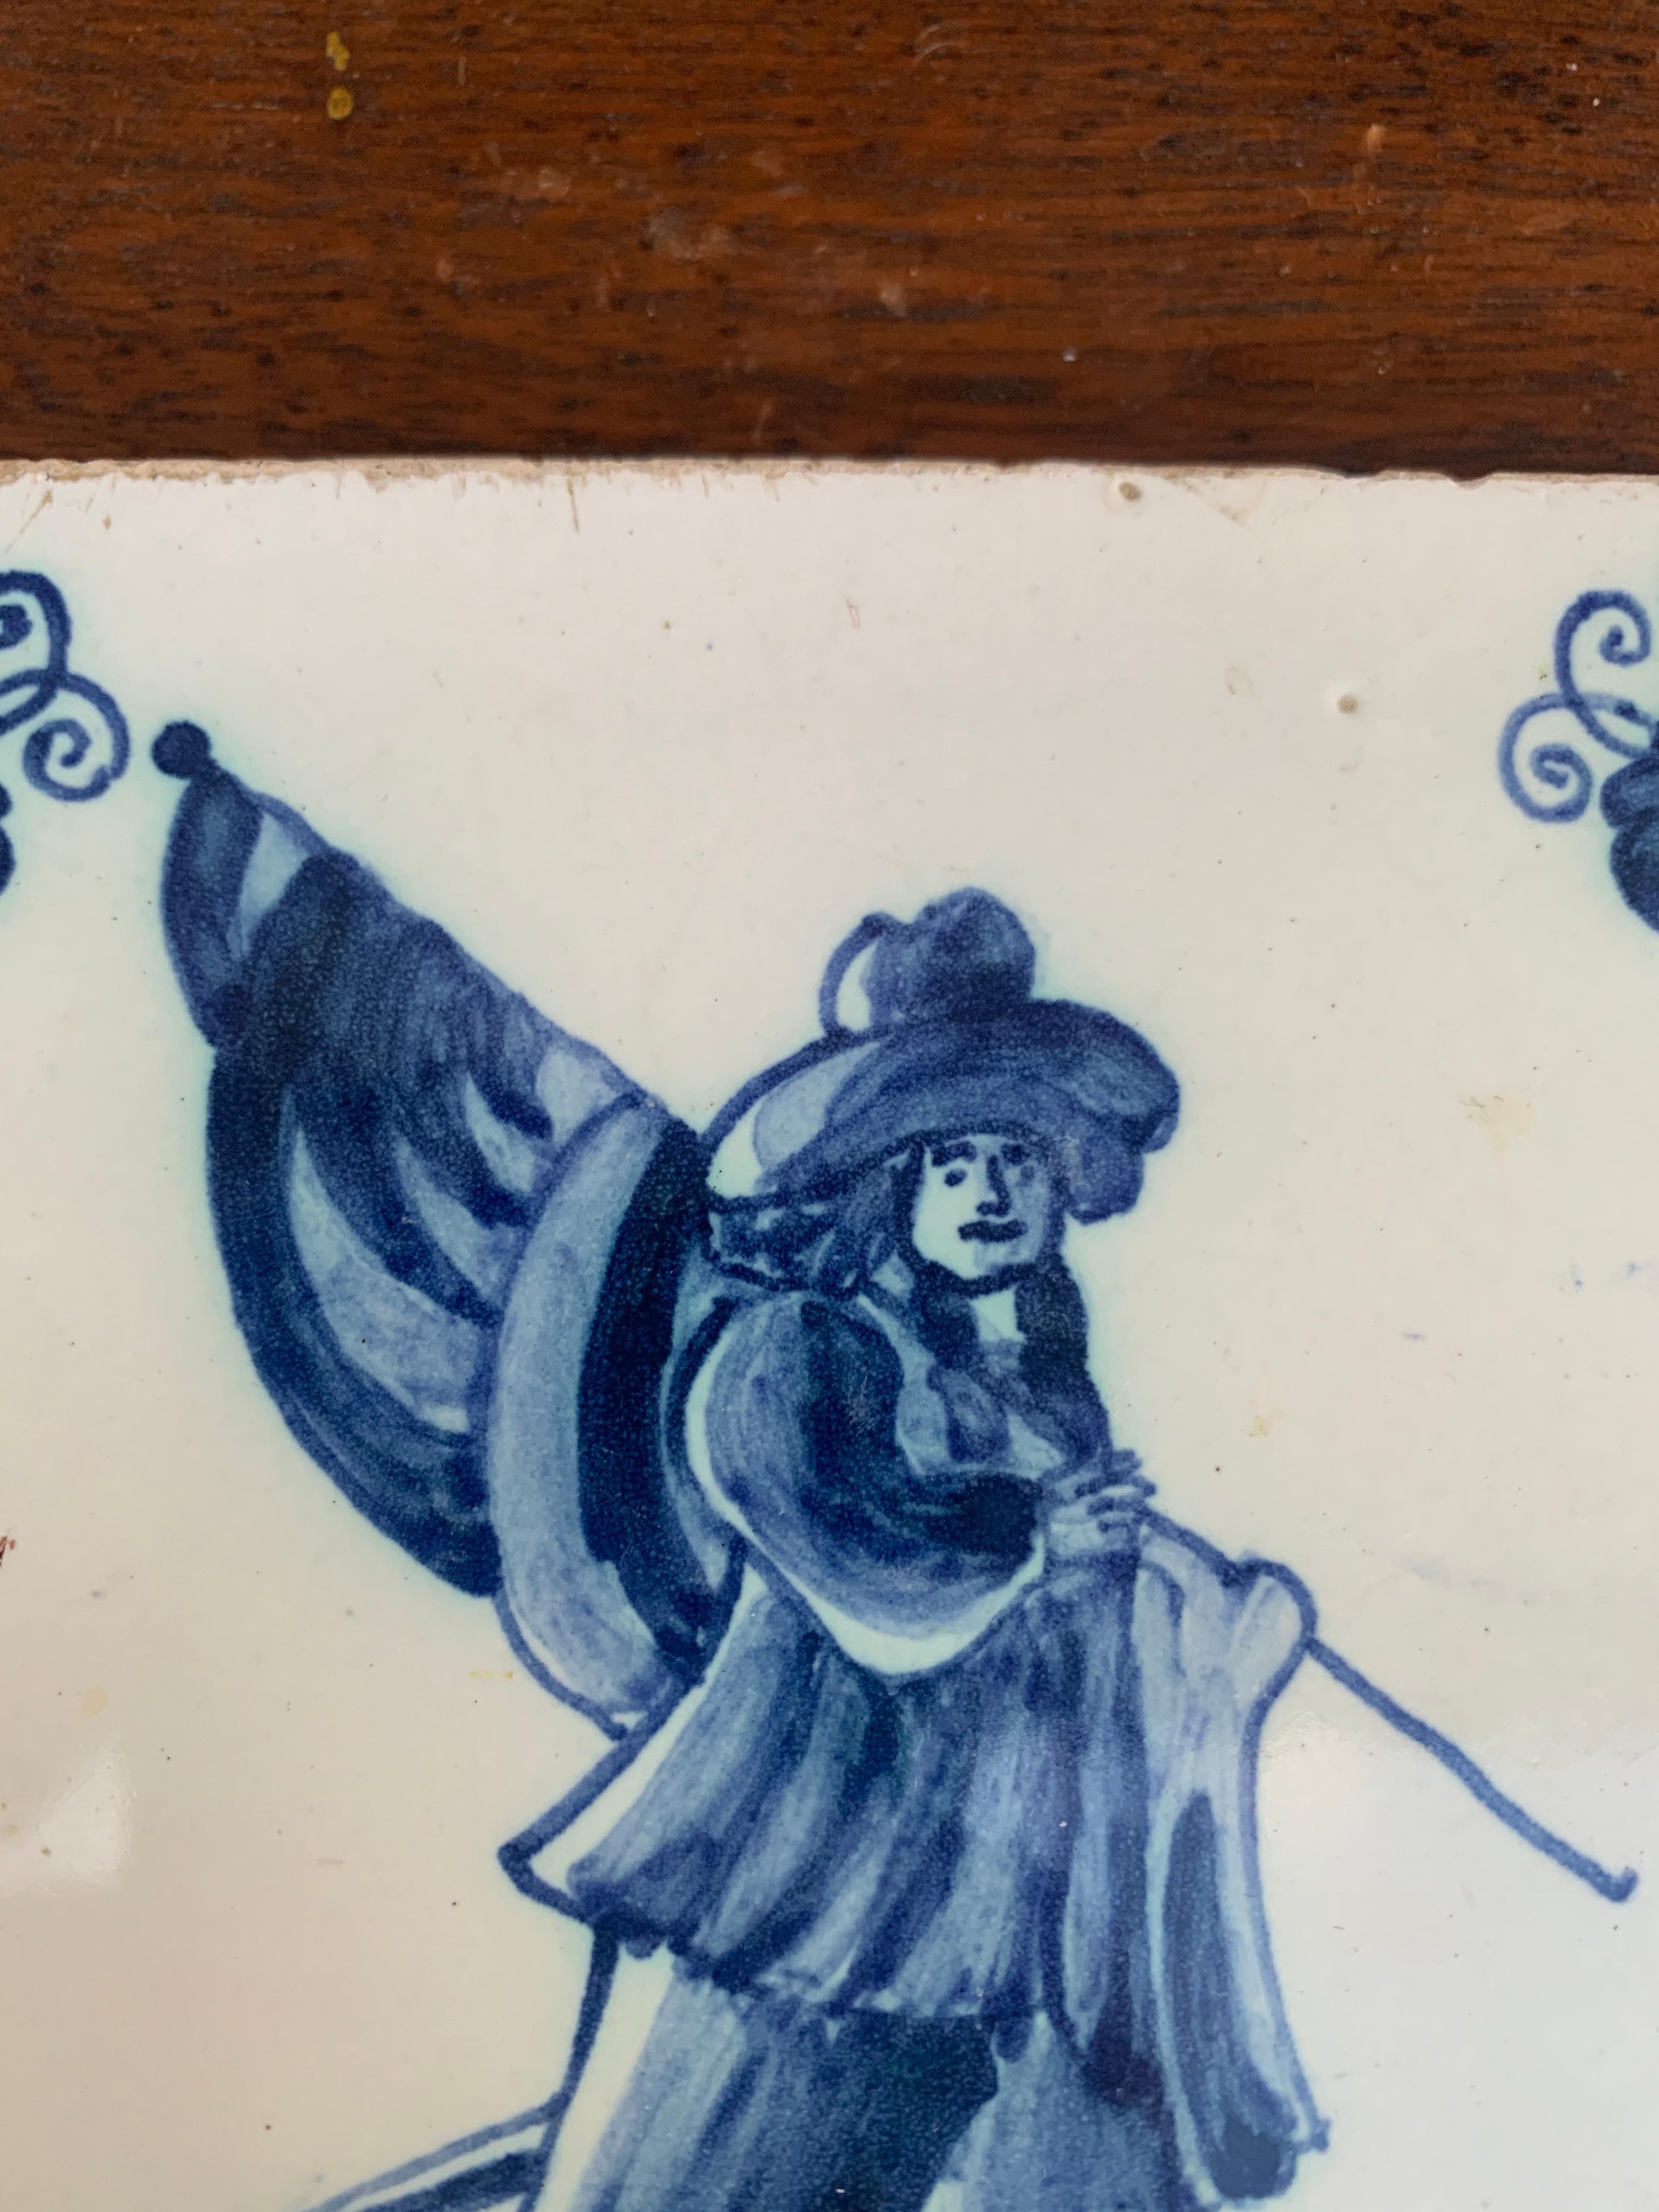 19th Century Antique Dutch Delft Style Blue and White Tile Featuring a Soldier For Sale